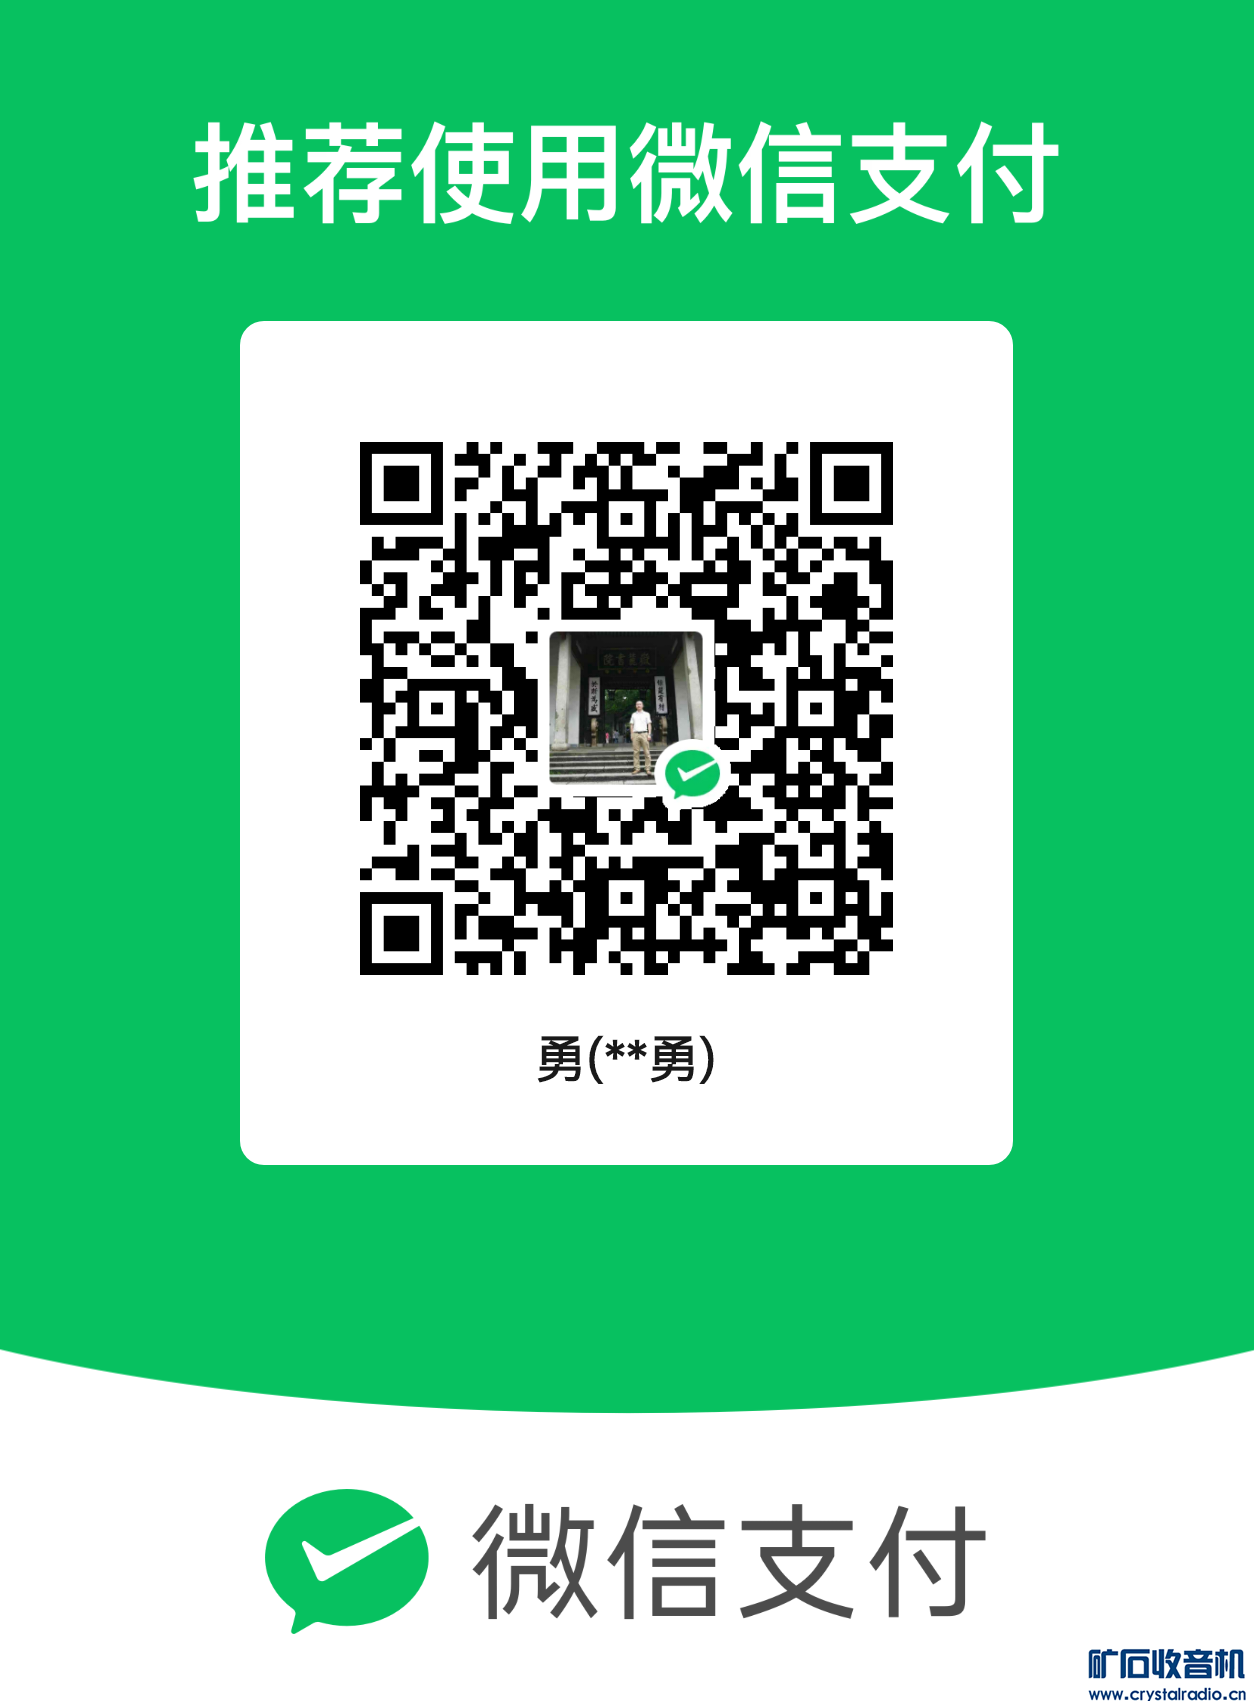 mm_facetoface_collect_qrcode_1694657610717.png